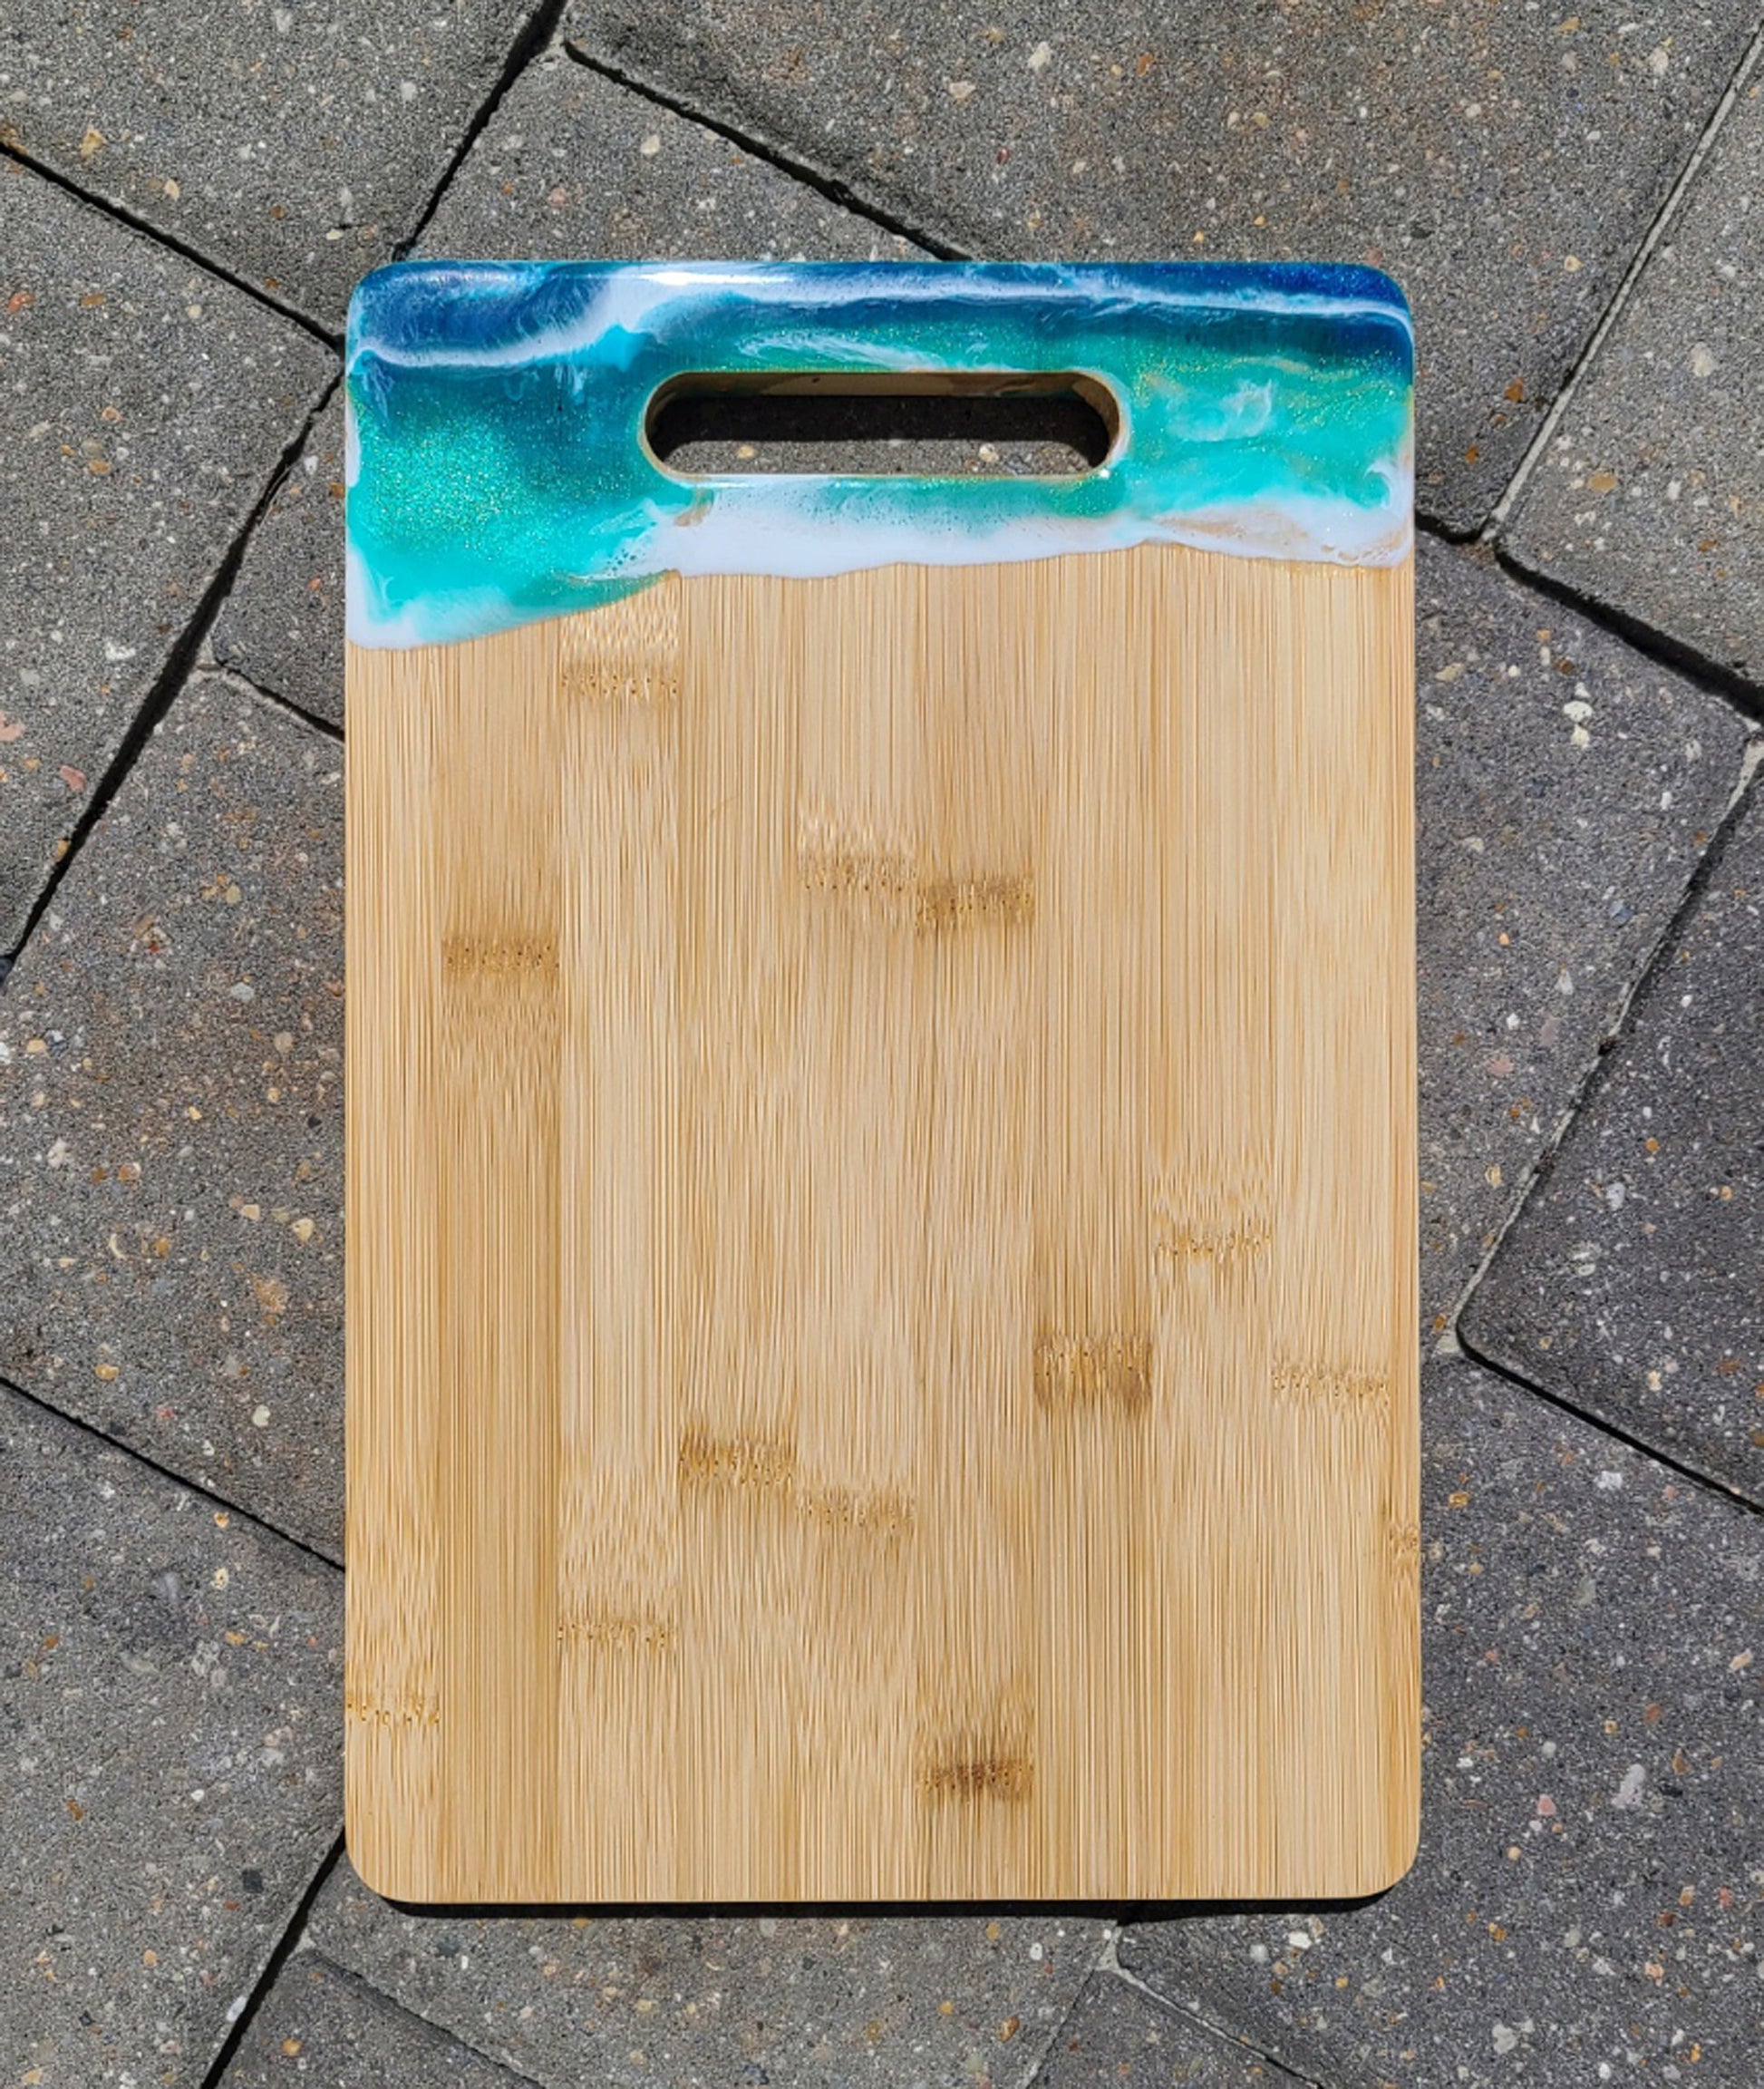 Sparkling colors of the ocean and white waves give this cutting board a touch of serenity for any home.  Functional as well as beautiful.  Bamboo board by Brookstone.  Approximate size: 8 x 12 inch  Resin is UV Resistant and Food Safe.  Care: Hand Wash Warm Water, Wipe with a damp cloth or alcohol wipe.